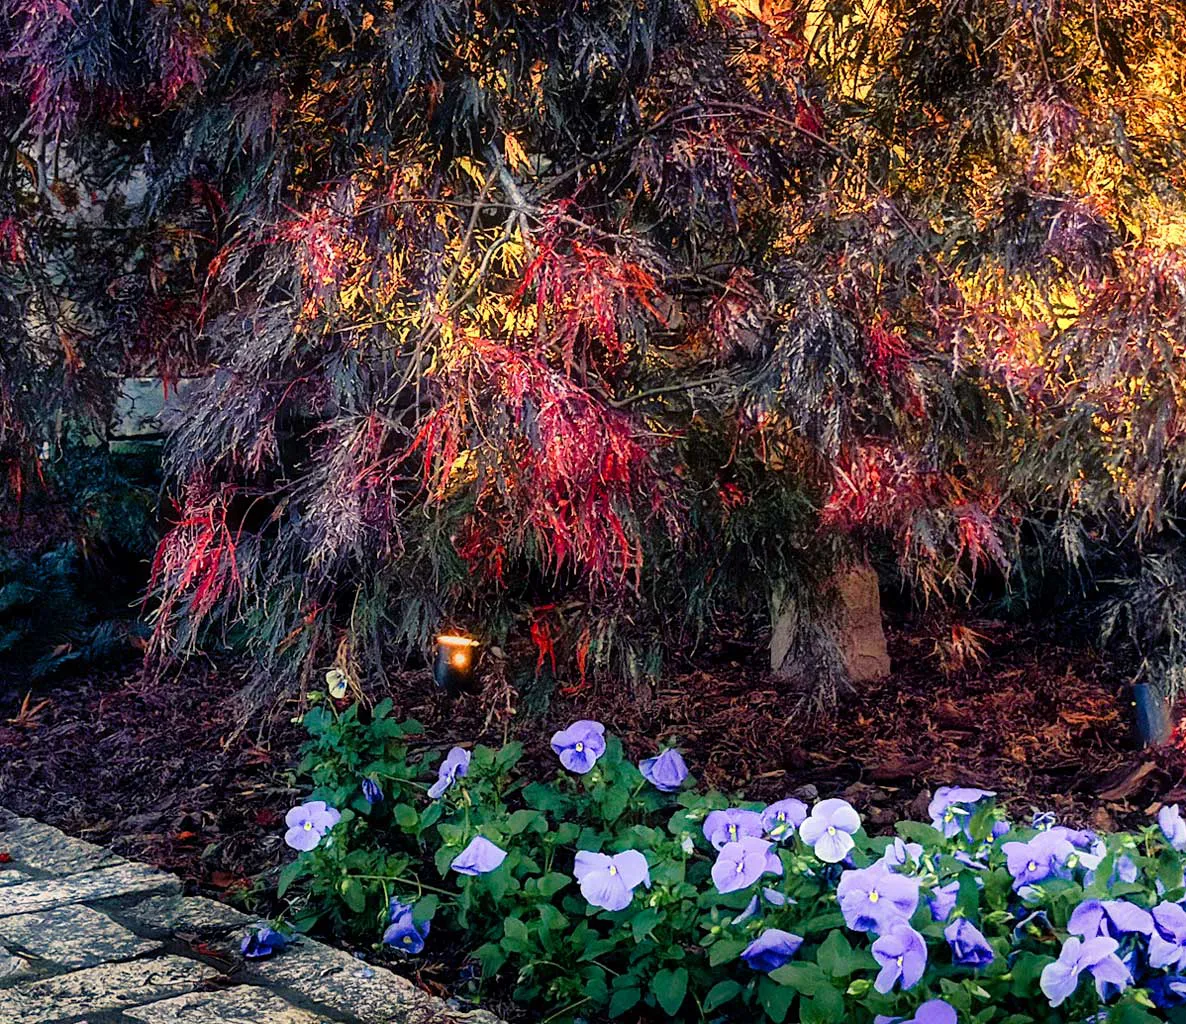 A small outdoor landscape light illuminates the appearance of small shrubs and flowers.